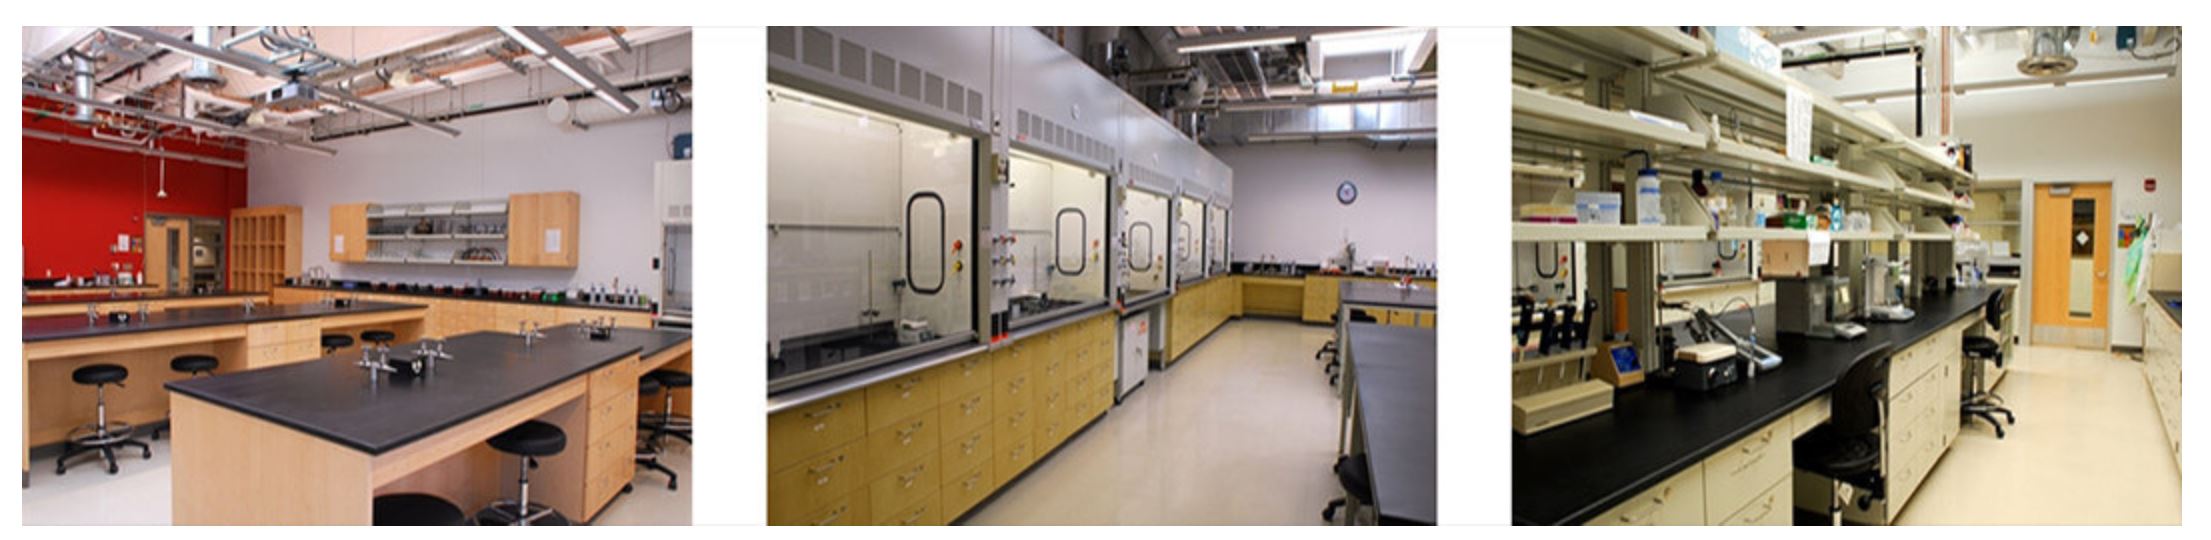 images of teaching labs in the Department of Chemistry & Biochemistry